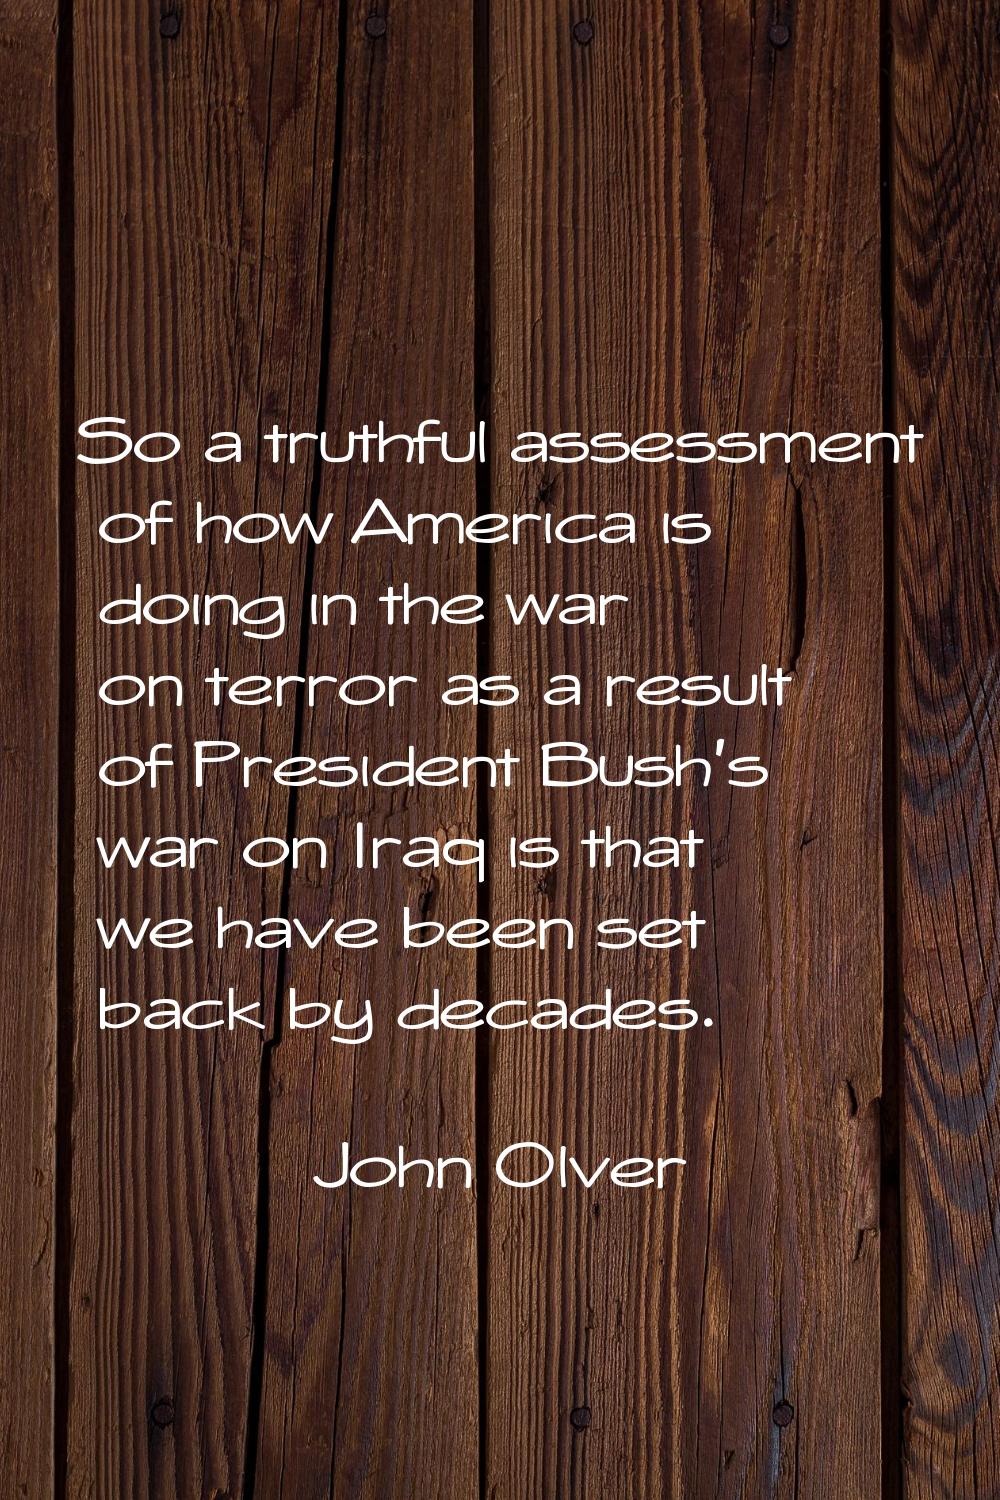 So a truthful assessment of how America is doing in the war on terror as a result of President Bush